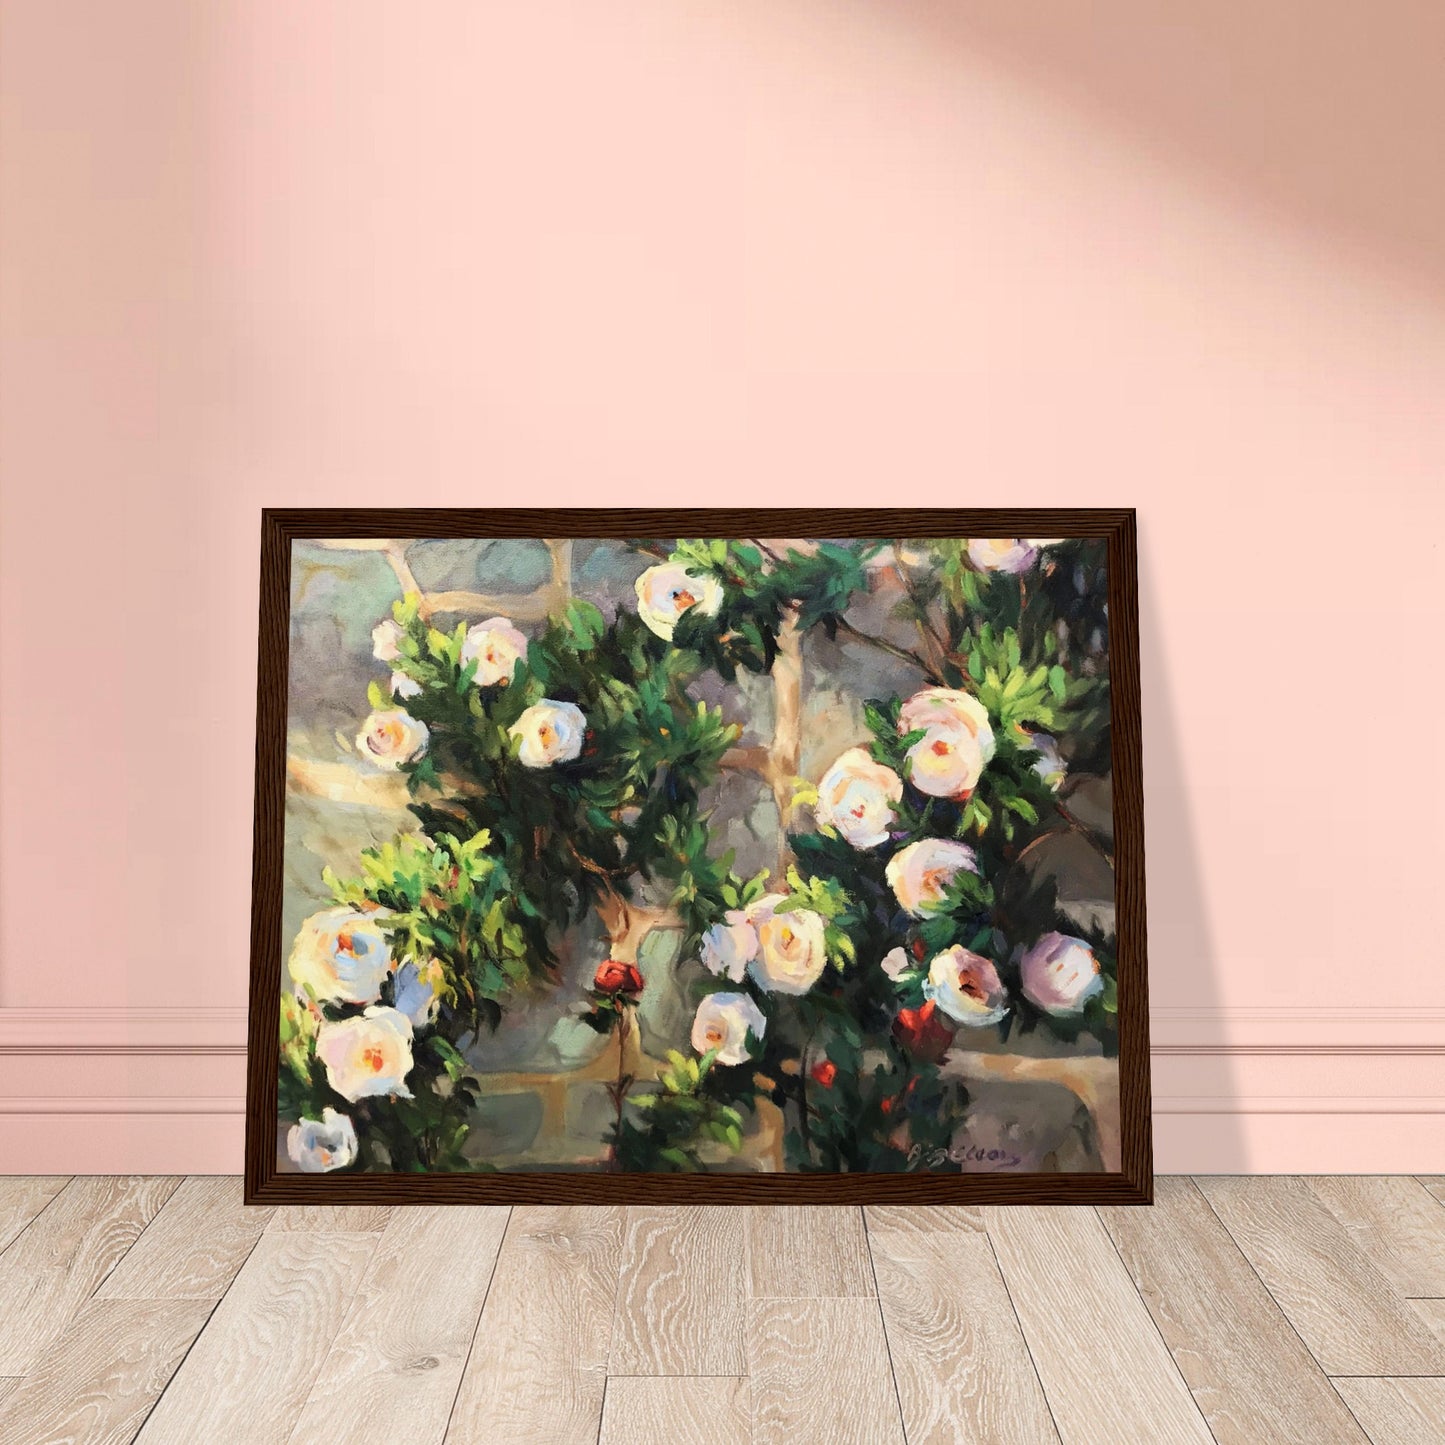 "Vining Roses" Wooden Framed 12x16 Art Print by Barbara Cleary Designs